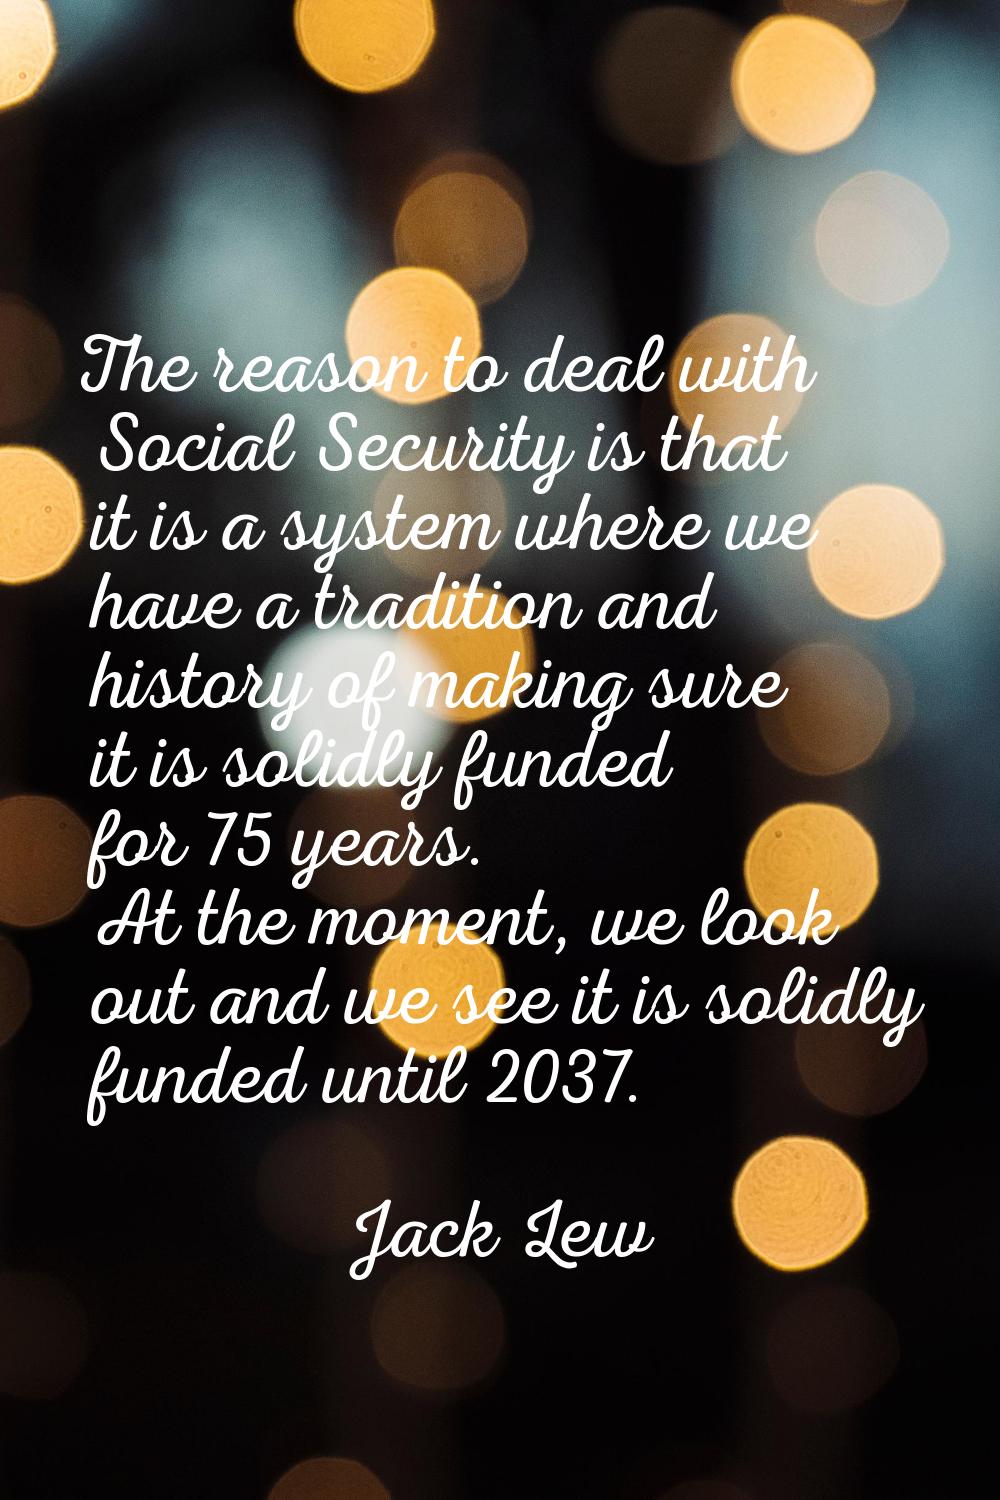 The reason to deal with Social Security is that it is a system where we have a tradition and histor